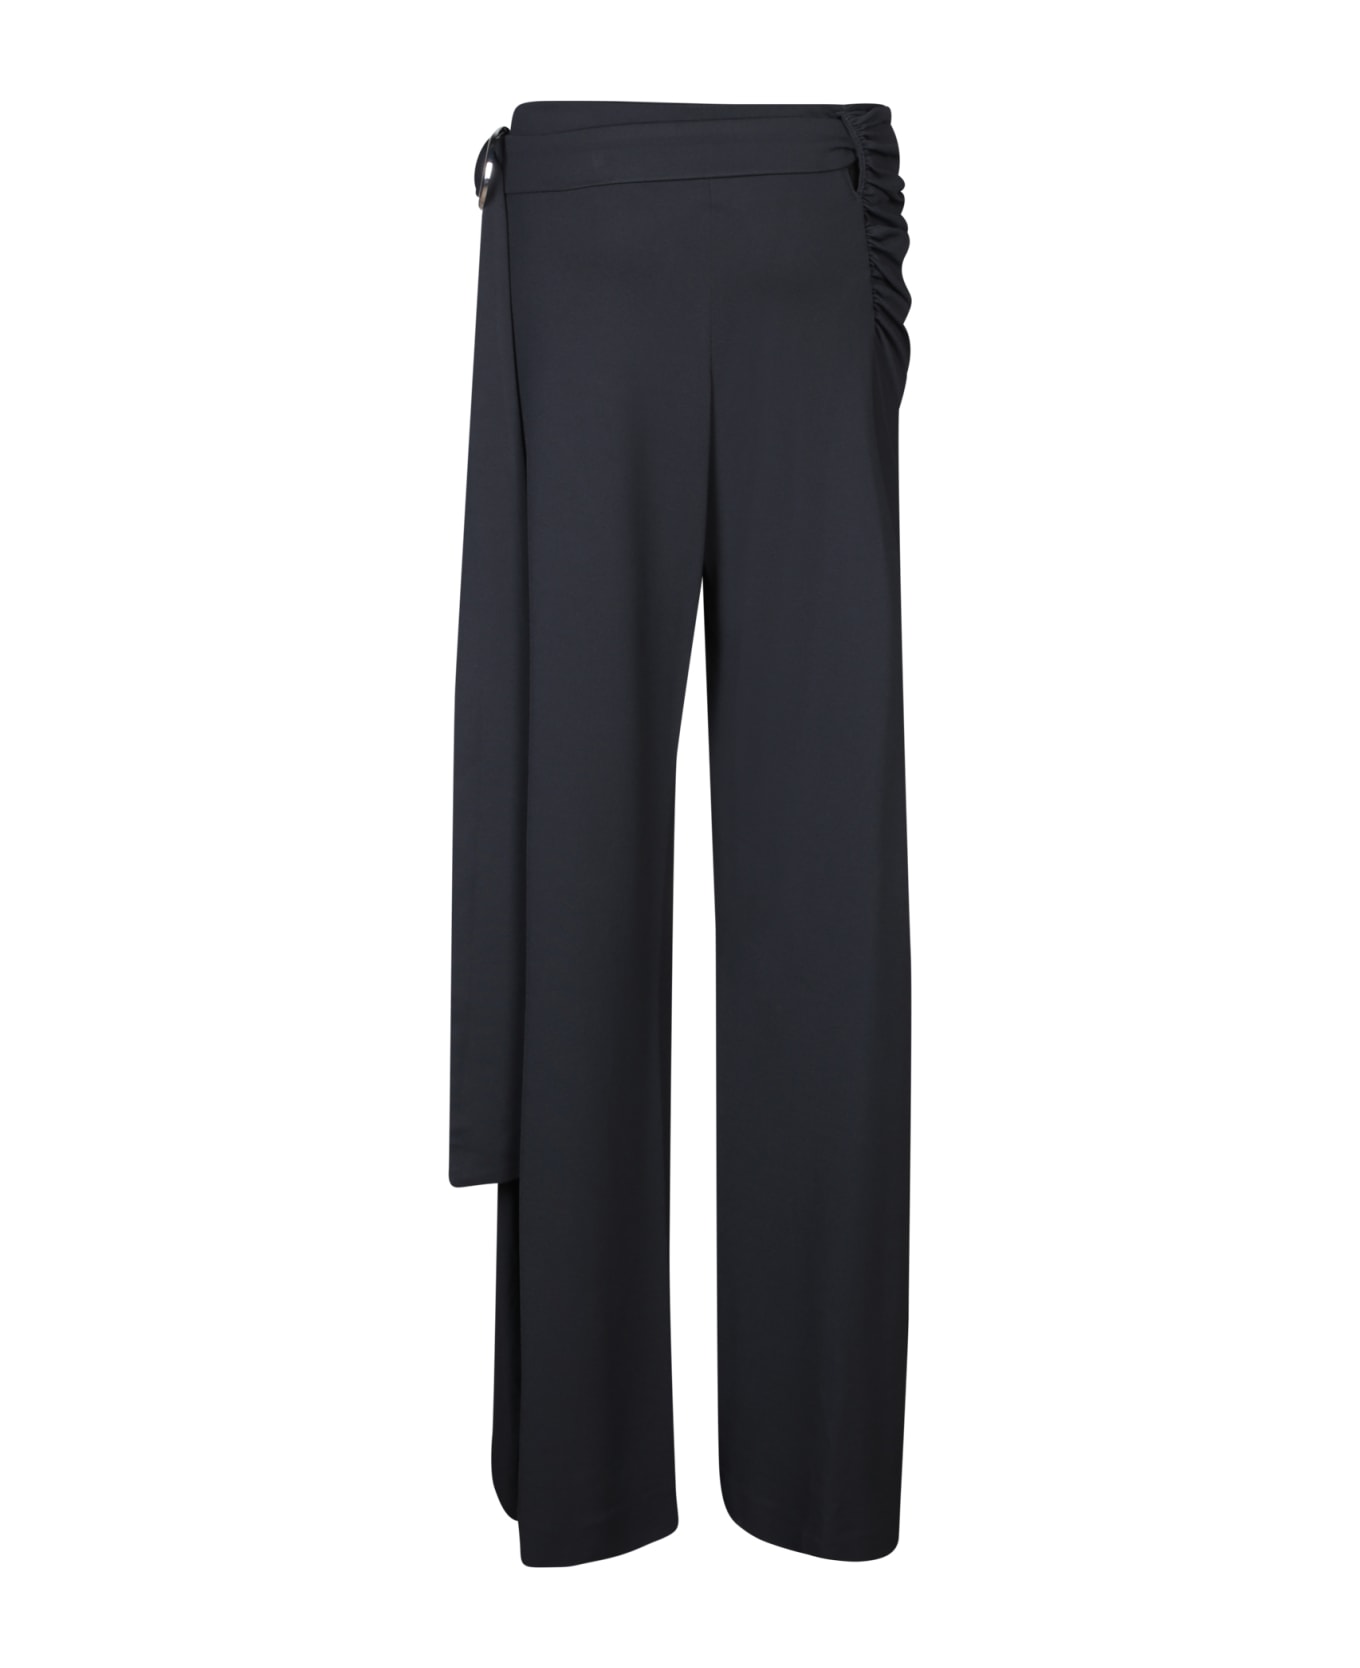 Paco Rabanne Black Jersey Knotted Trousers - Paco Rabanne - Black